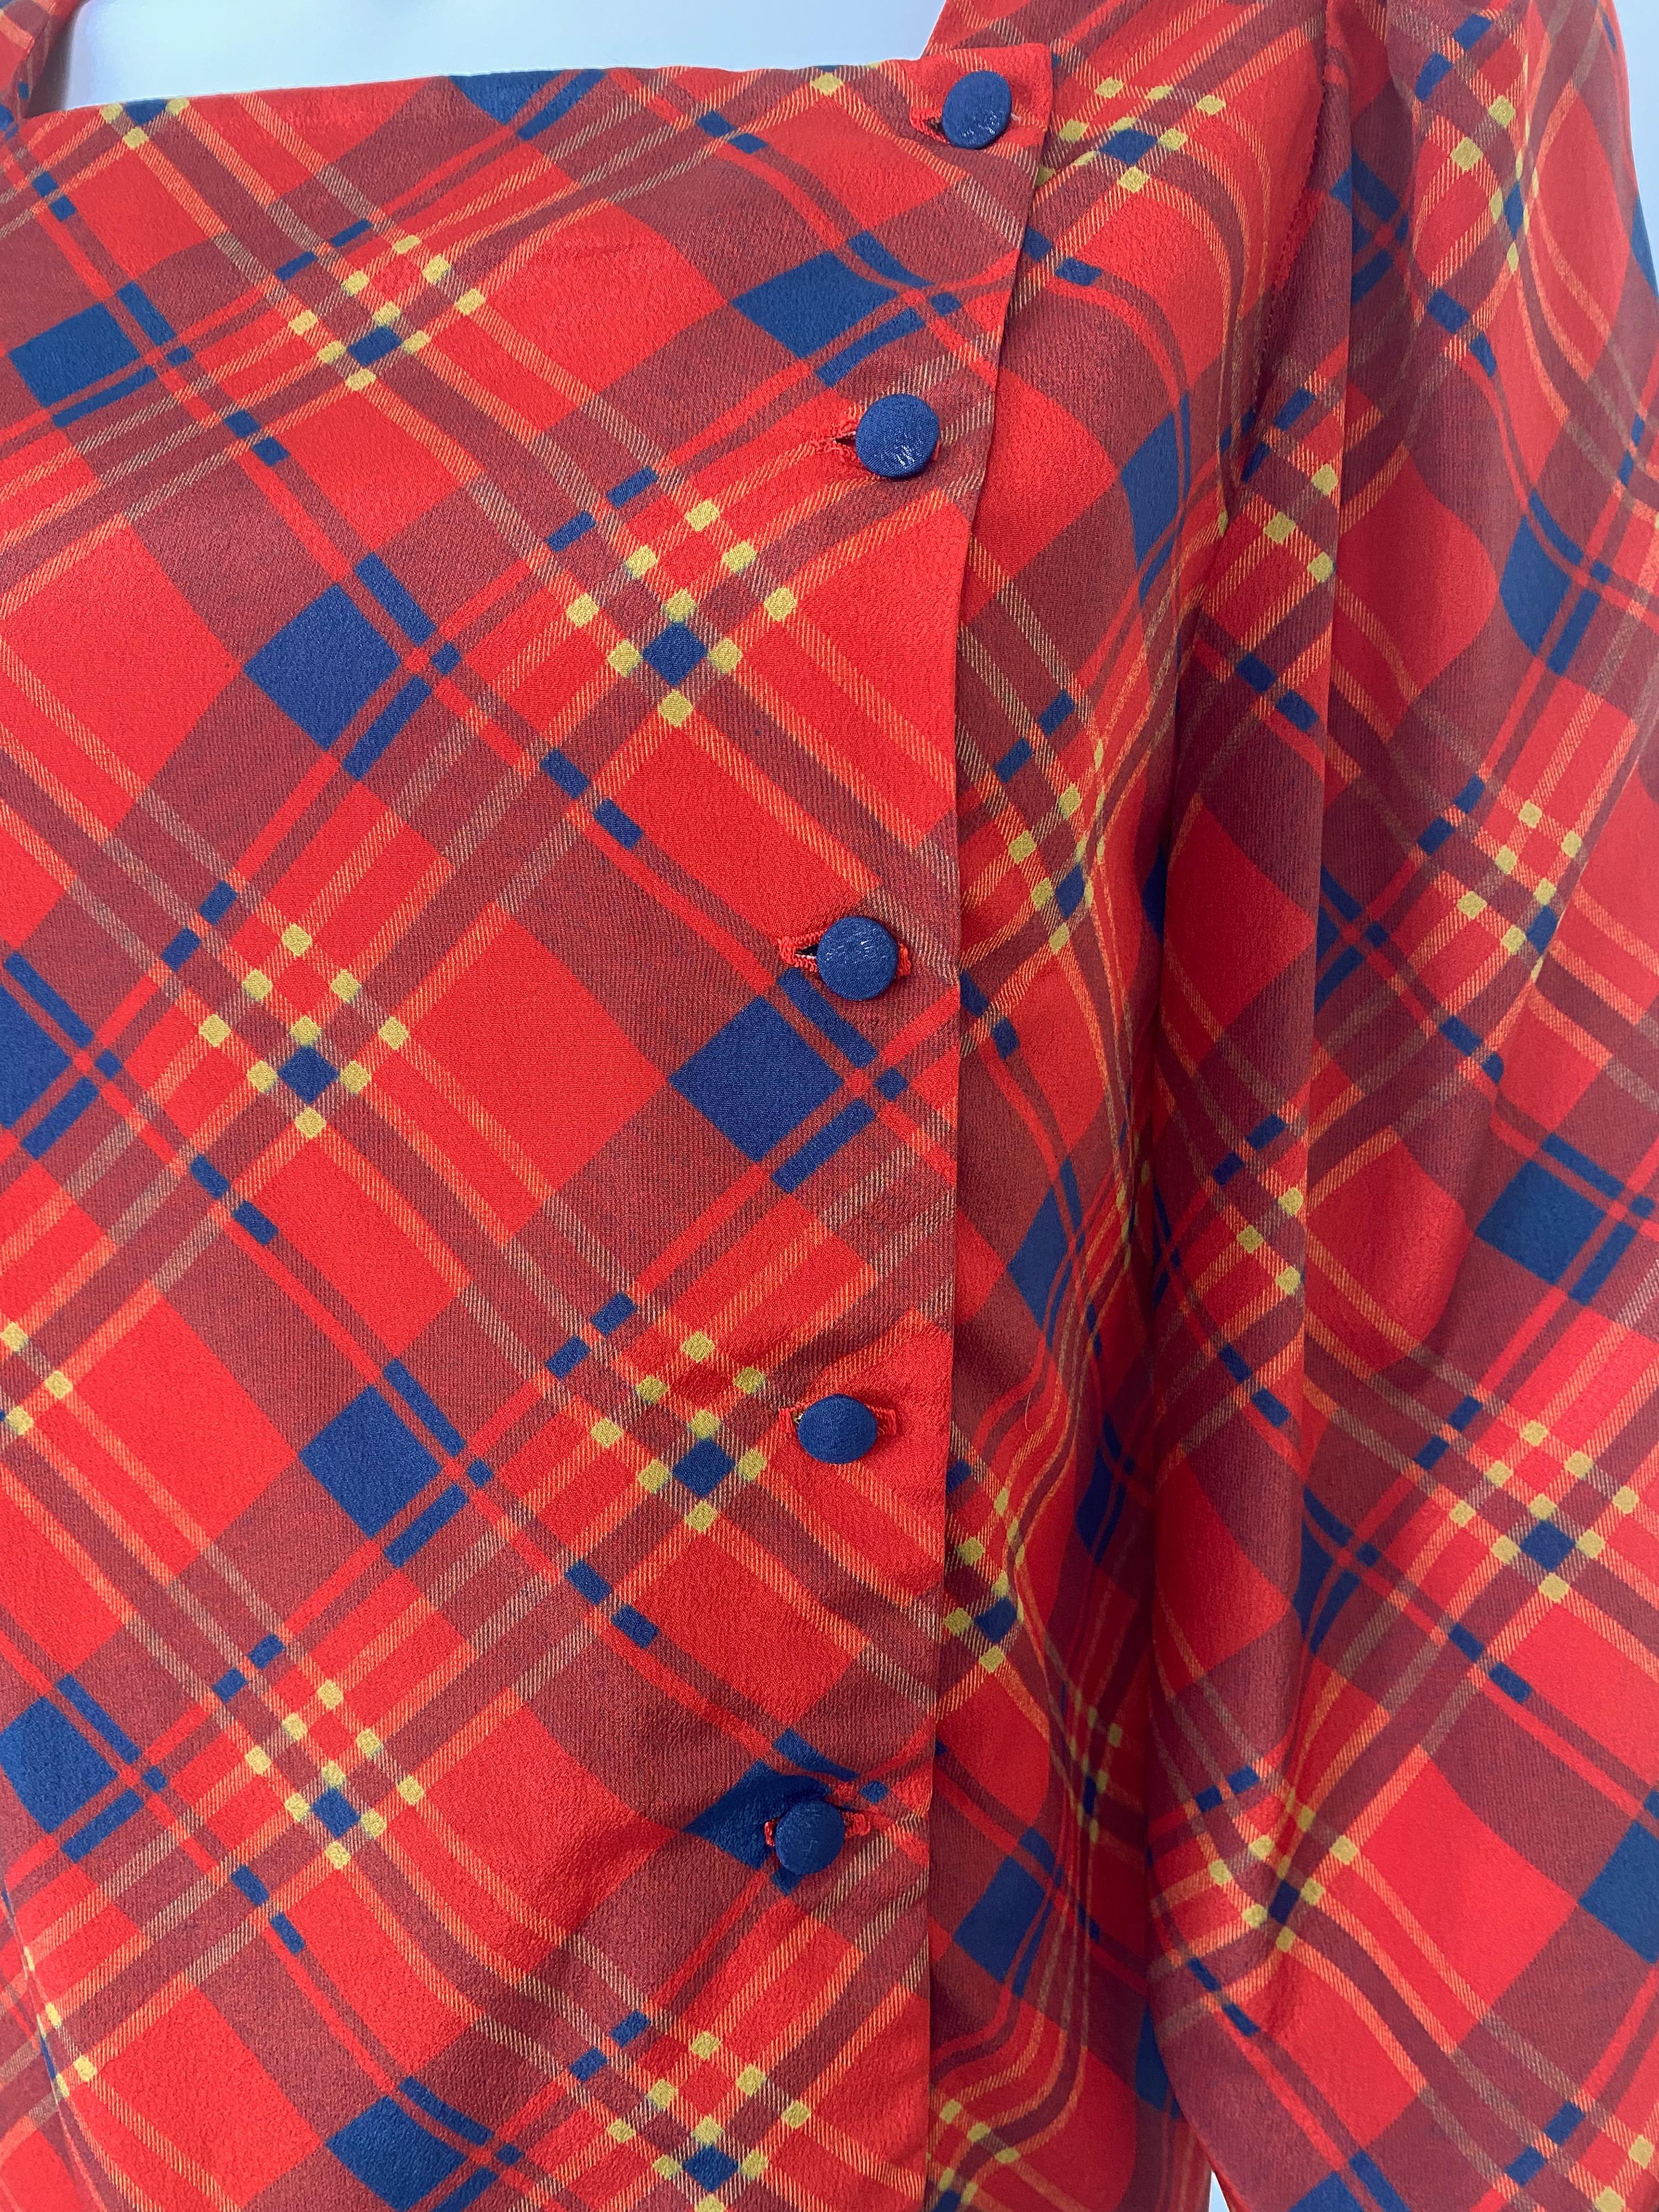 Vintage 1980s Silky Polyester Blouse Top Red and Blue Tartan Size 6/8 For Sale 6